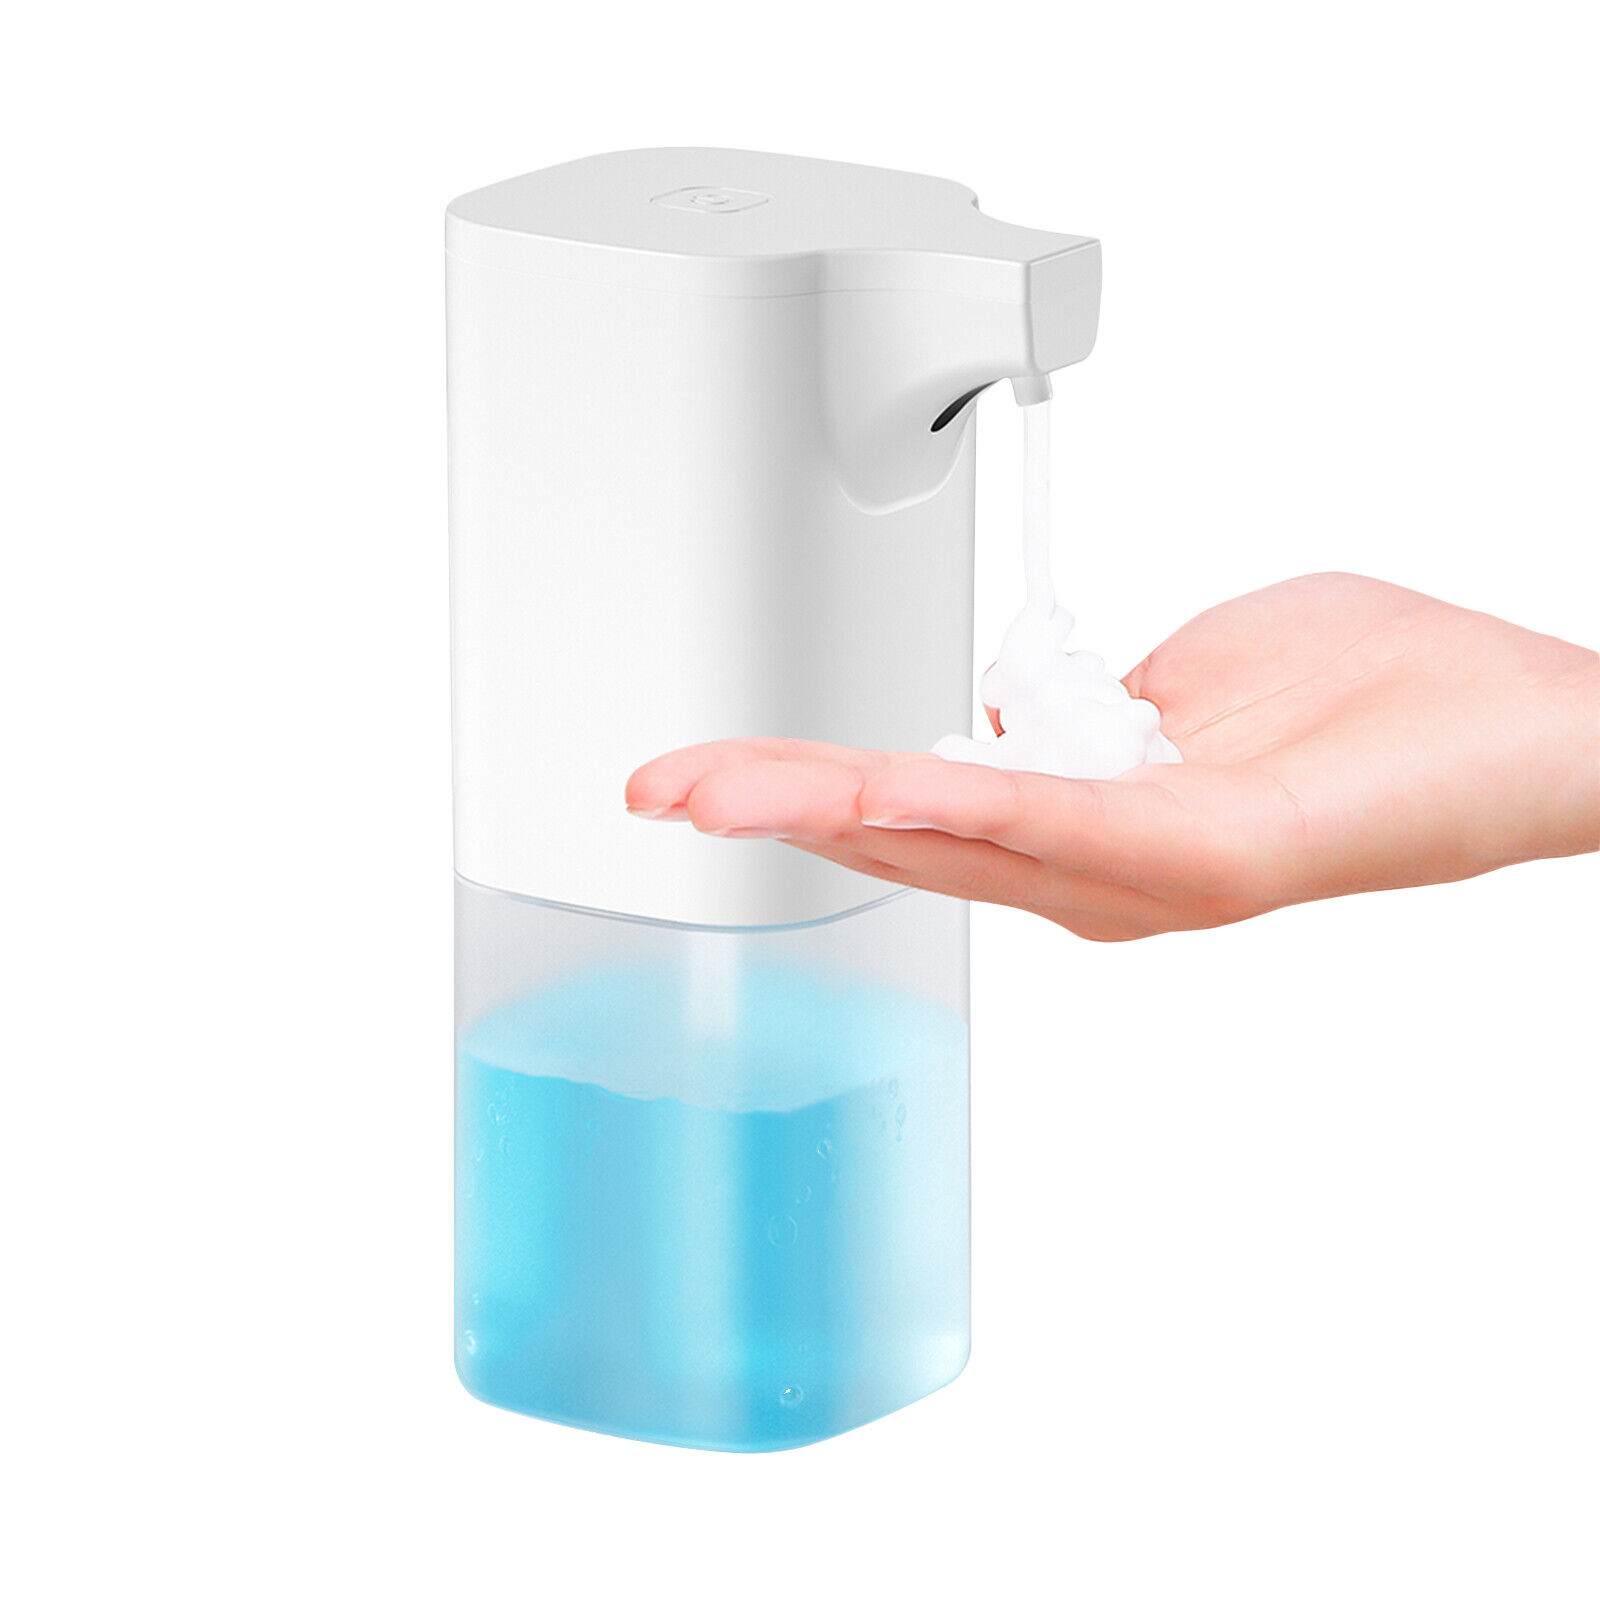 350ml Automatic Soap Dispenser Infrared Hand-free Touchless Soap Dispenser H9o1